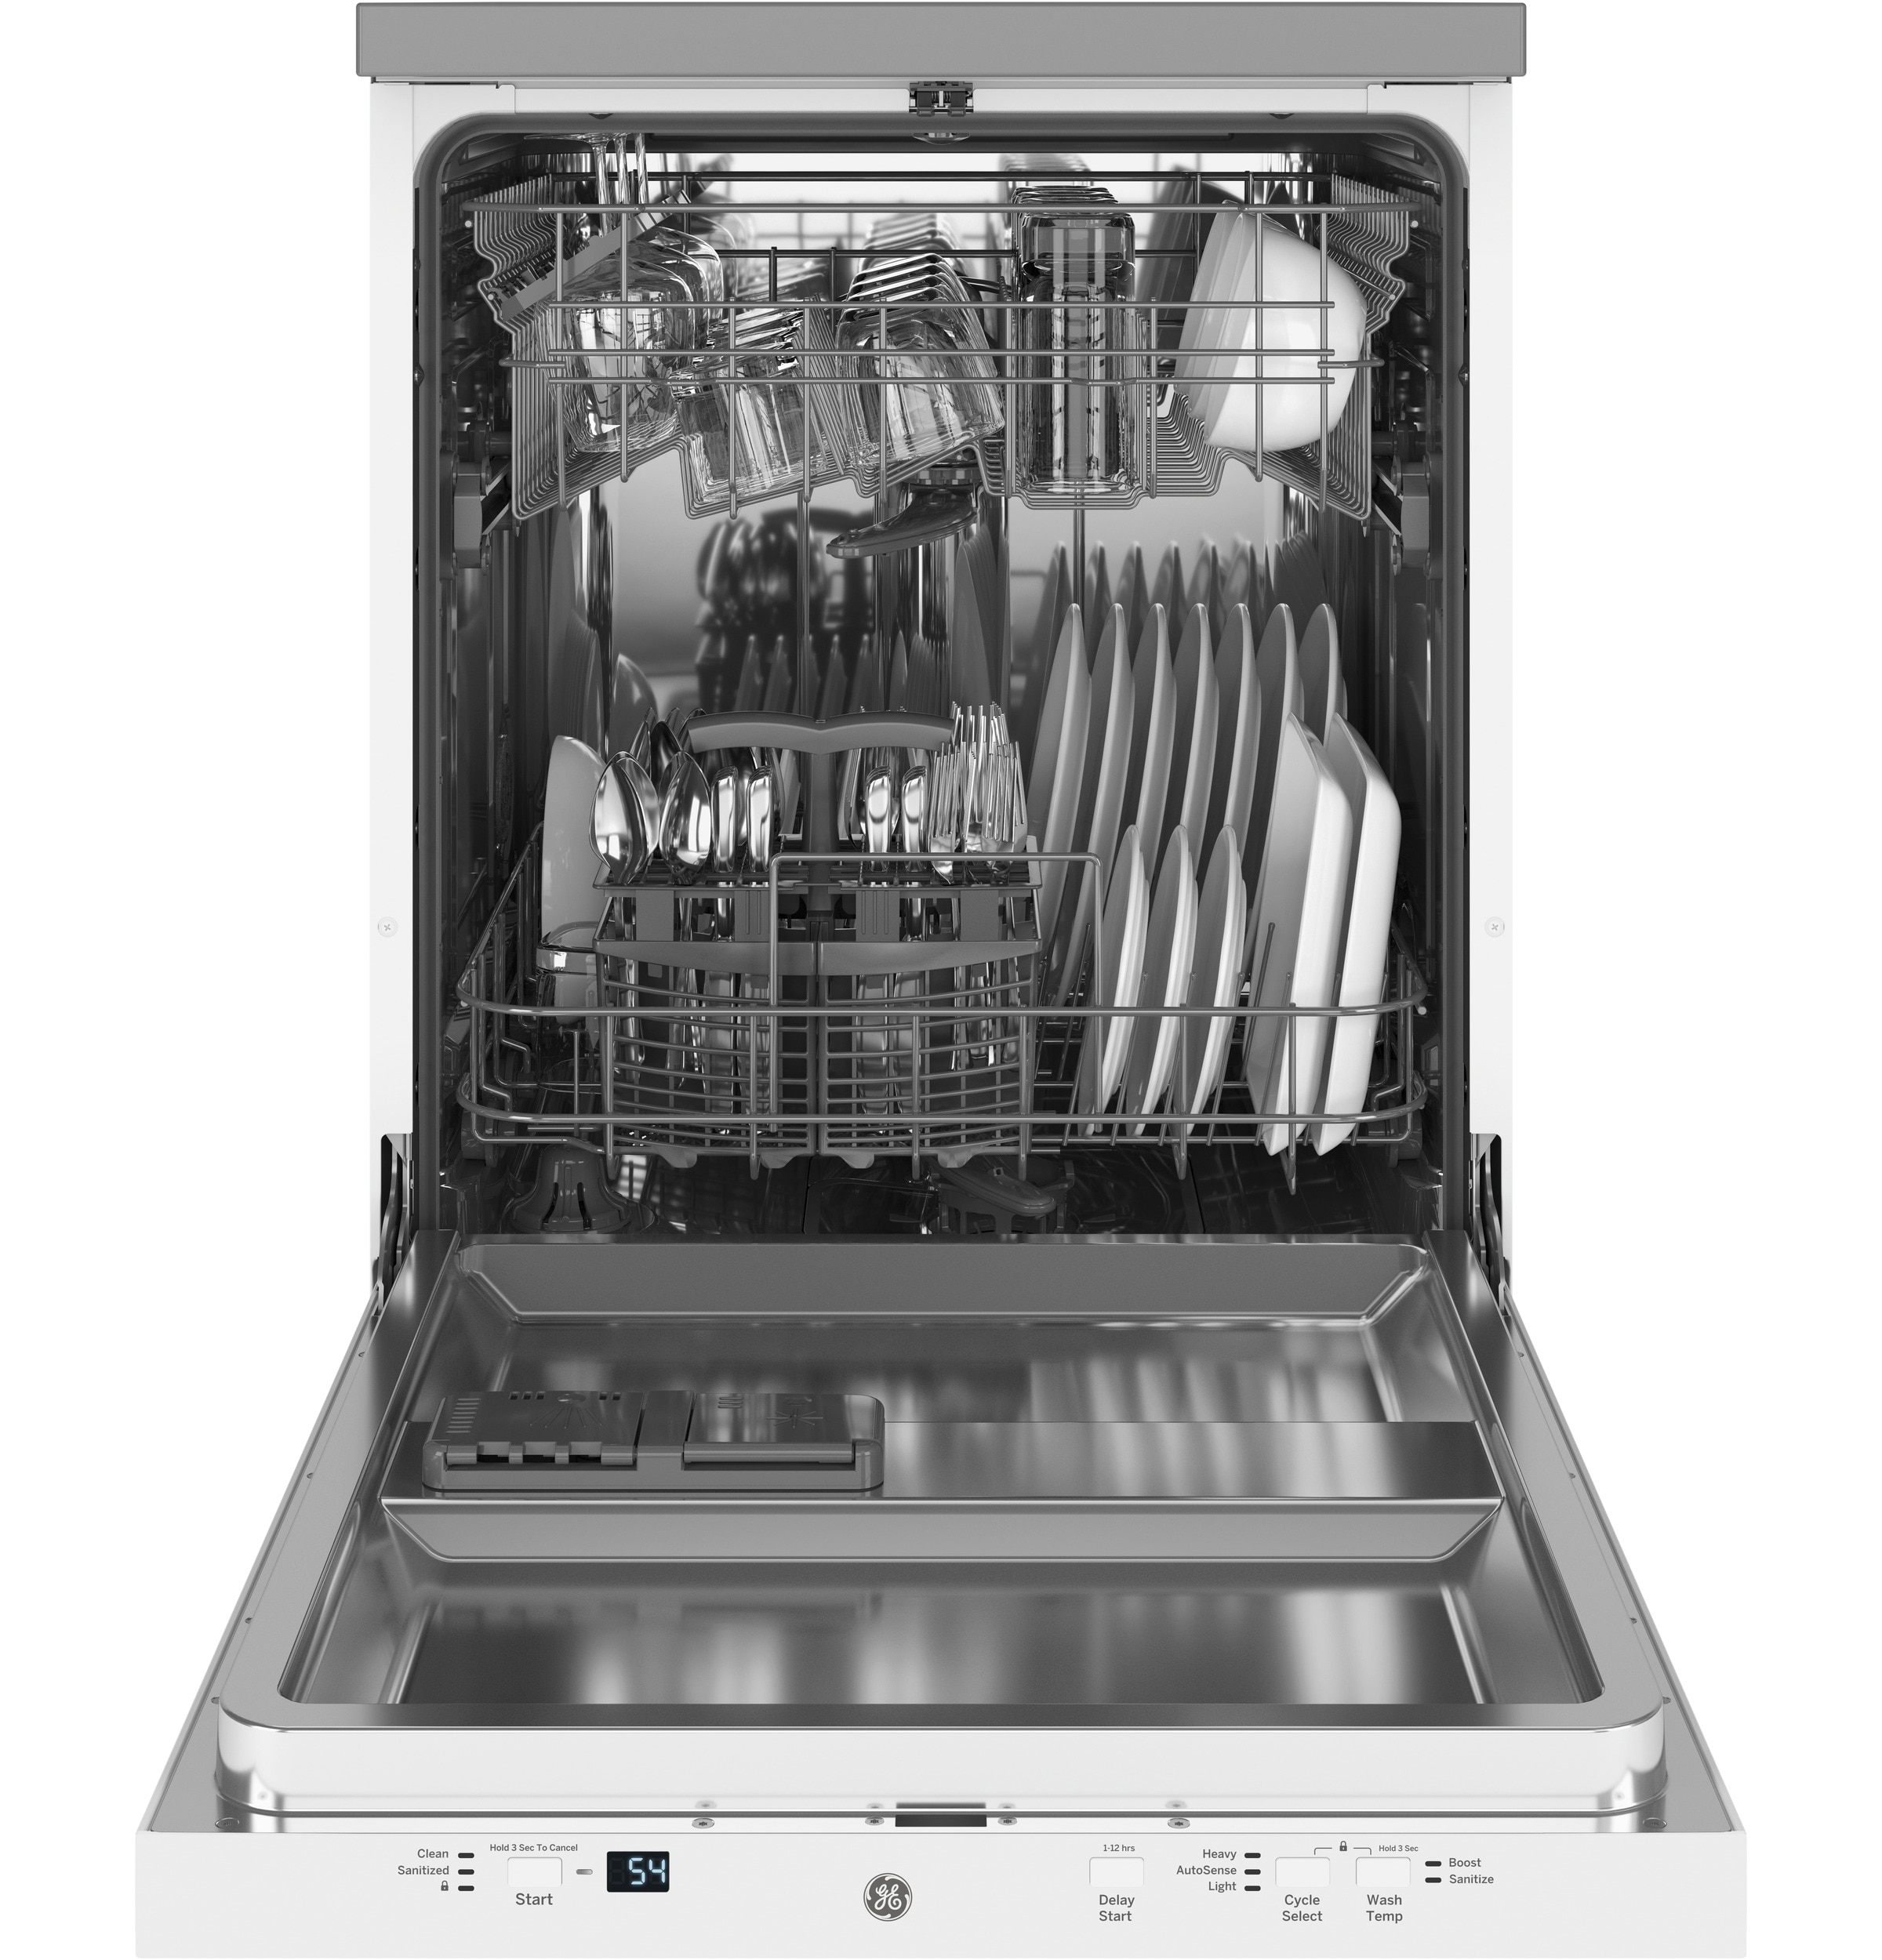 GE 23.625-in Portable Freestanding Dishwasher (Used, Excellent